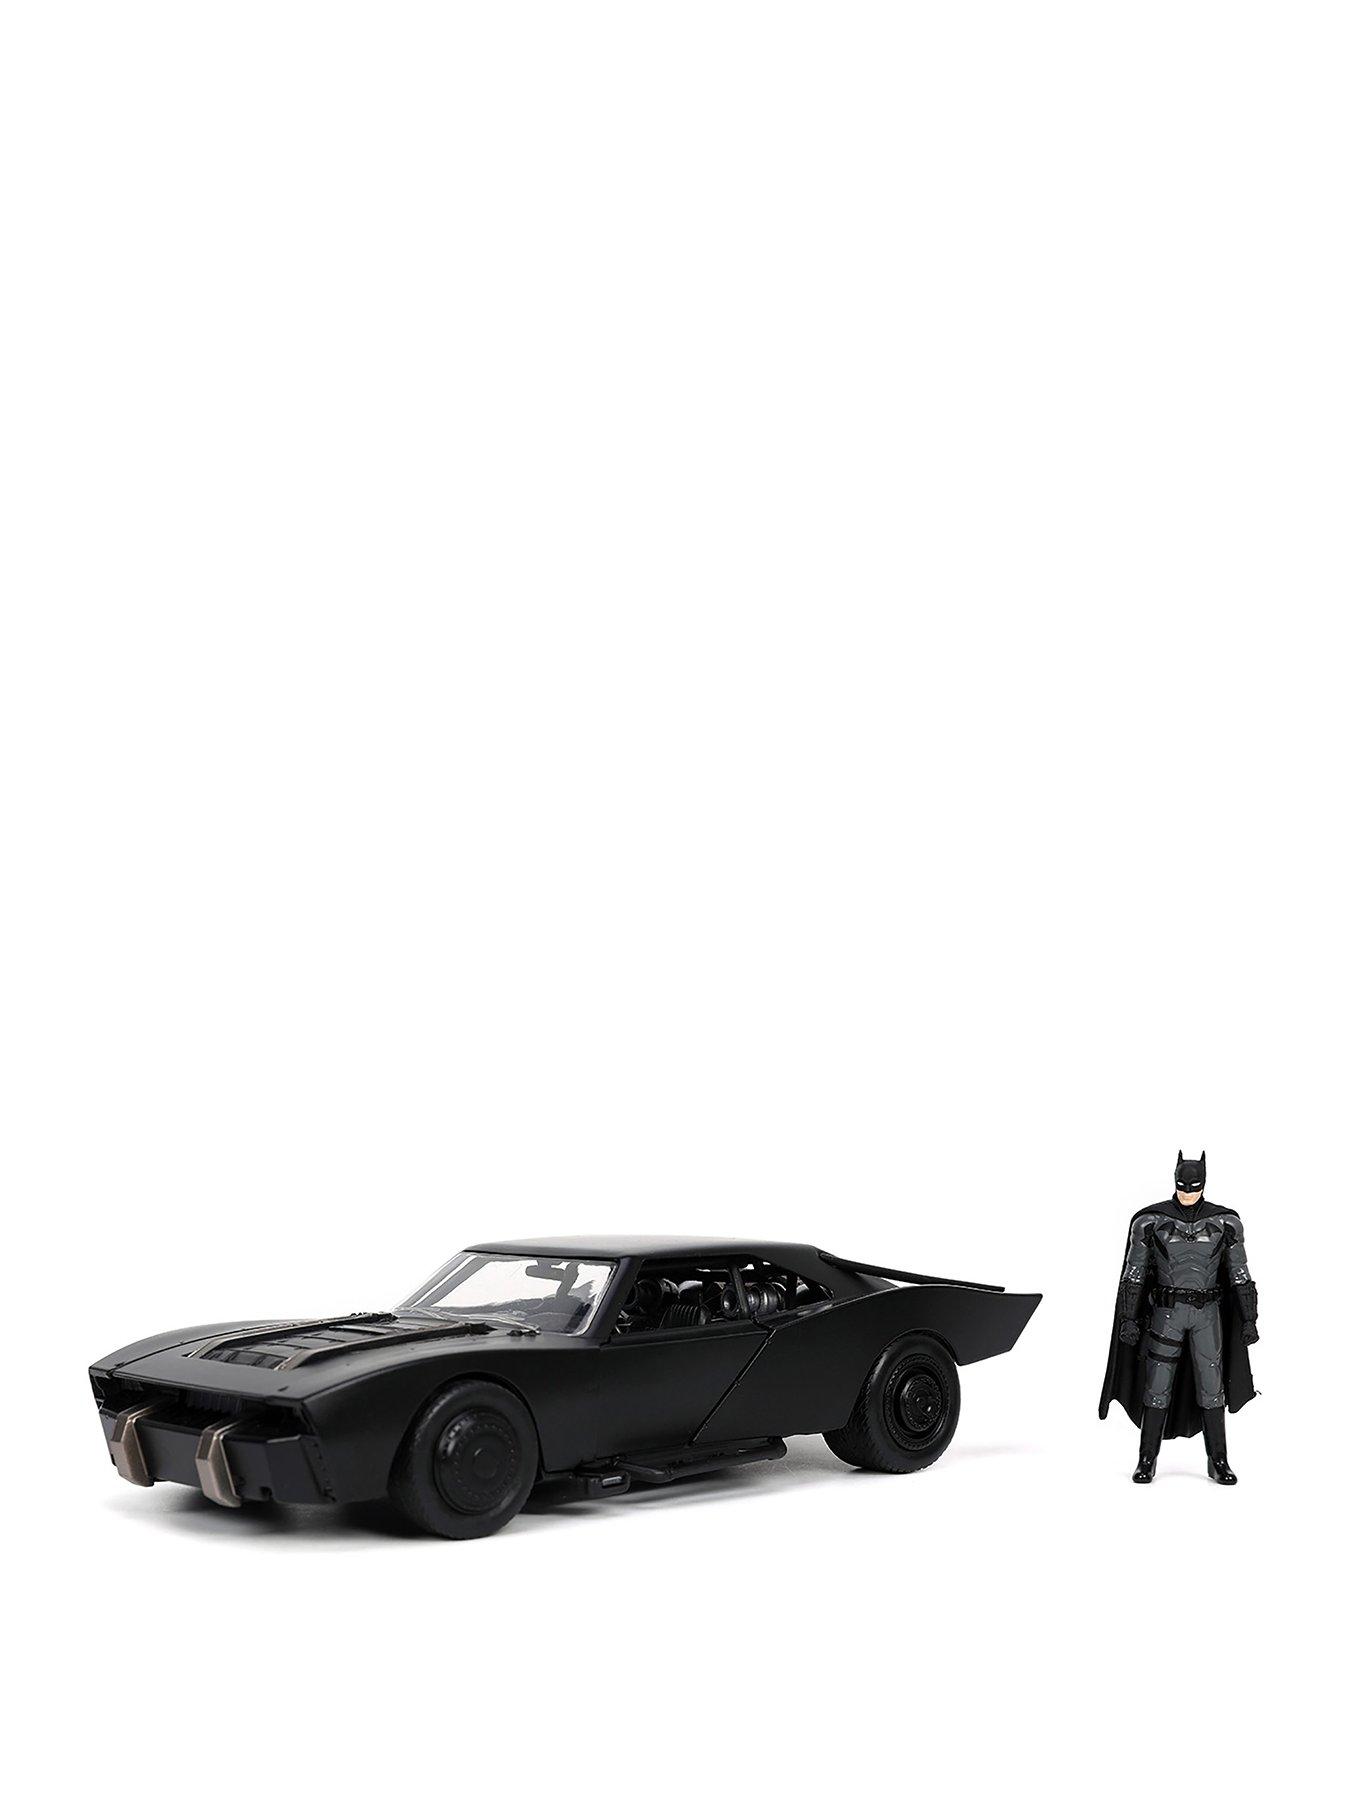 Jada Toys Releases High-end Collectible “The Batman” Die-cast Batmobile  with Figure - aNb Media, Inc.